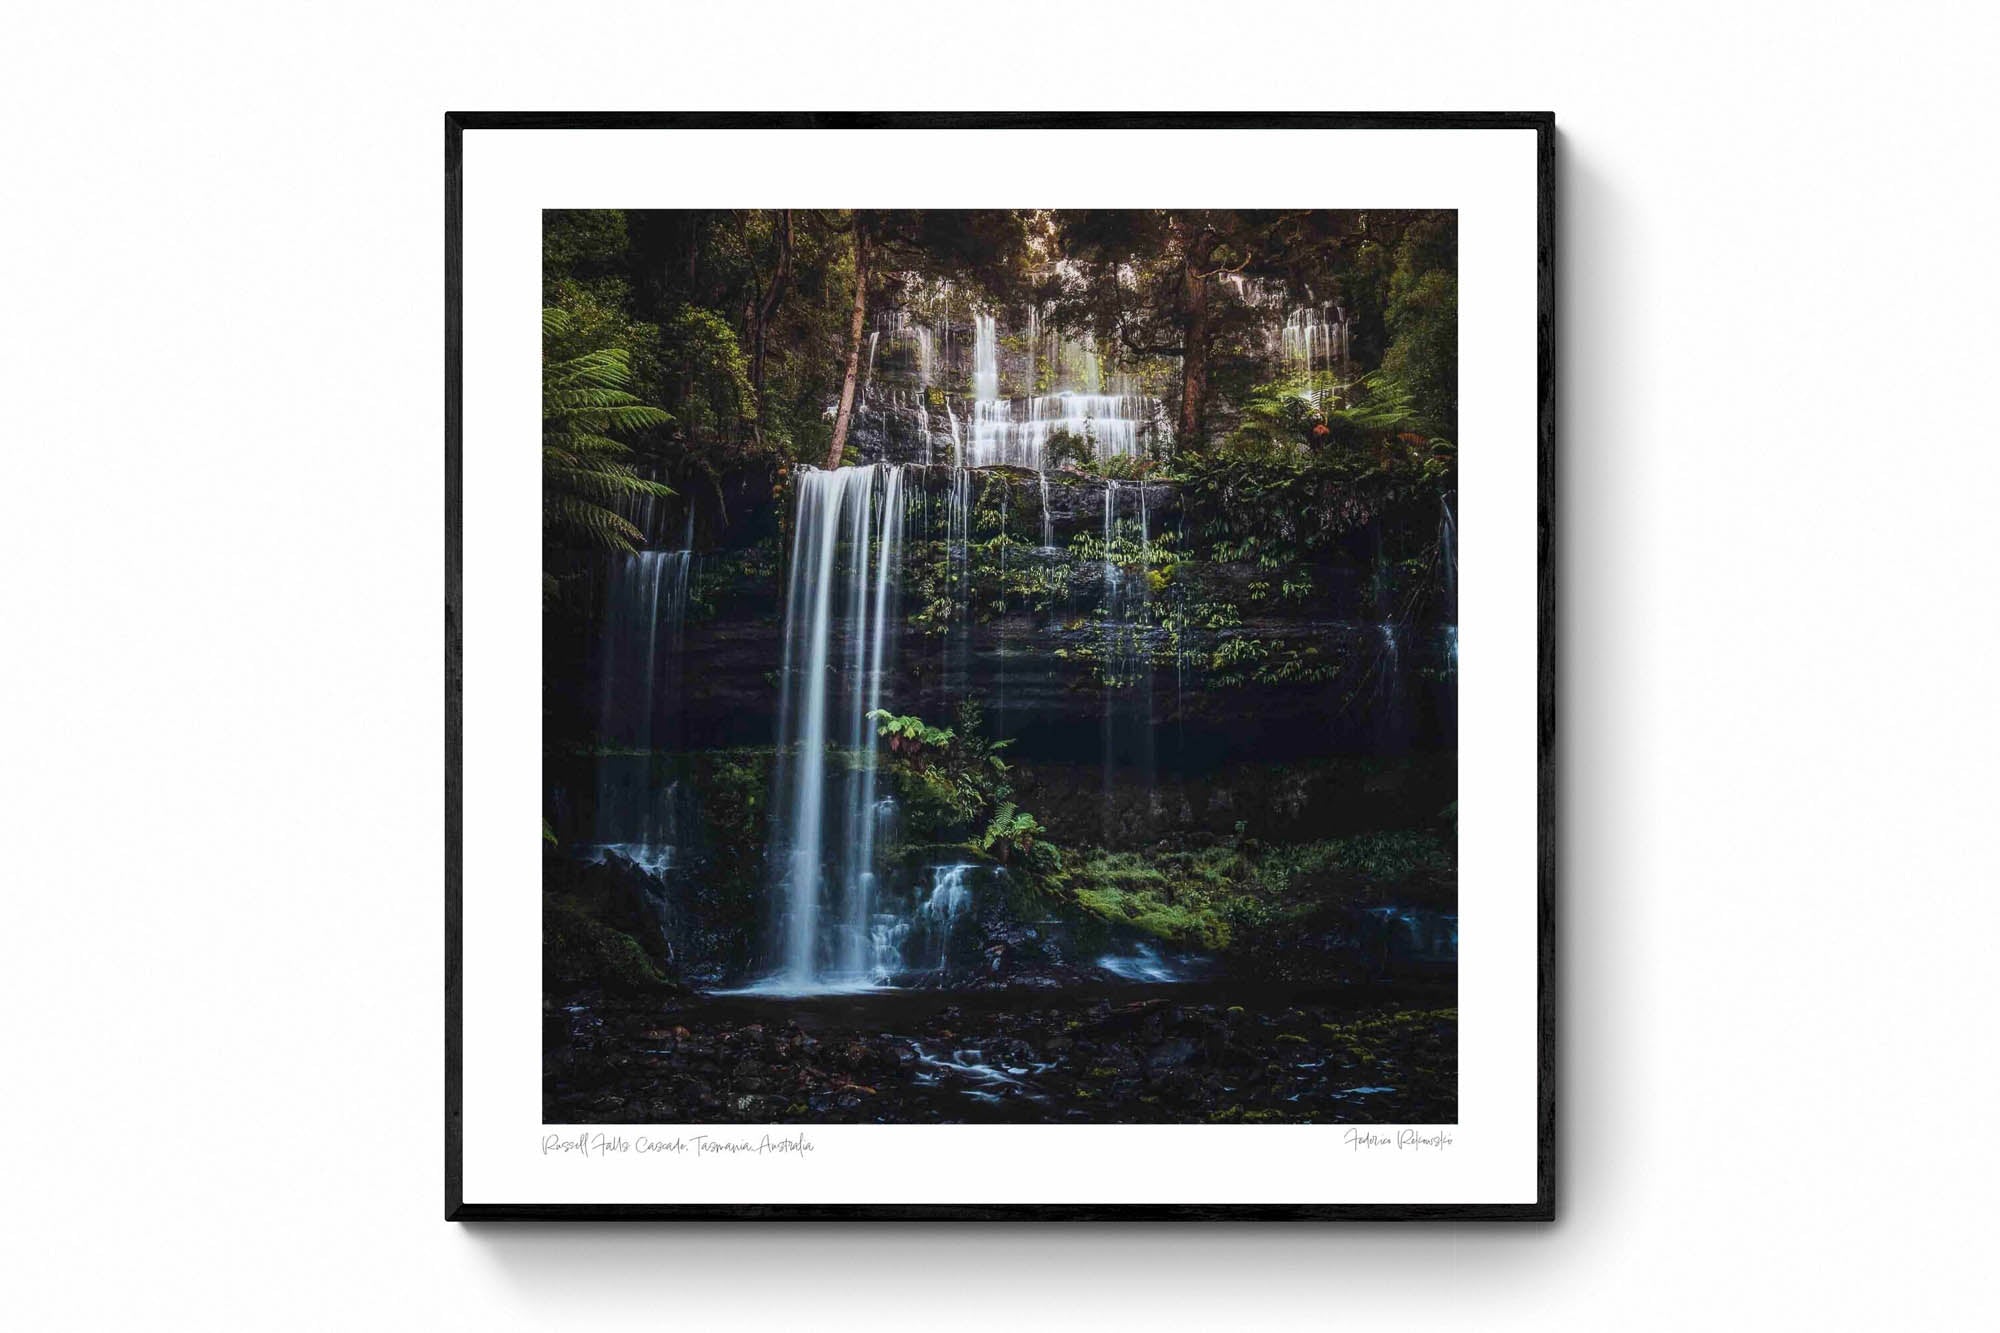 Long exposure photo of the multi-tiered Russell Falls in Tasmania, surrounded by a lush, fern-draped forest.